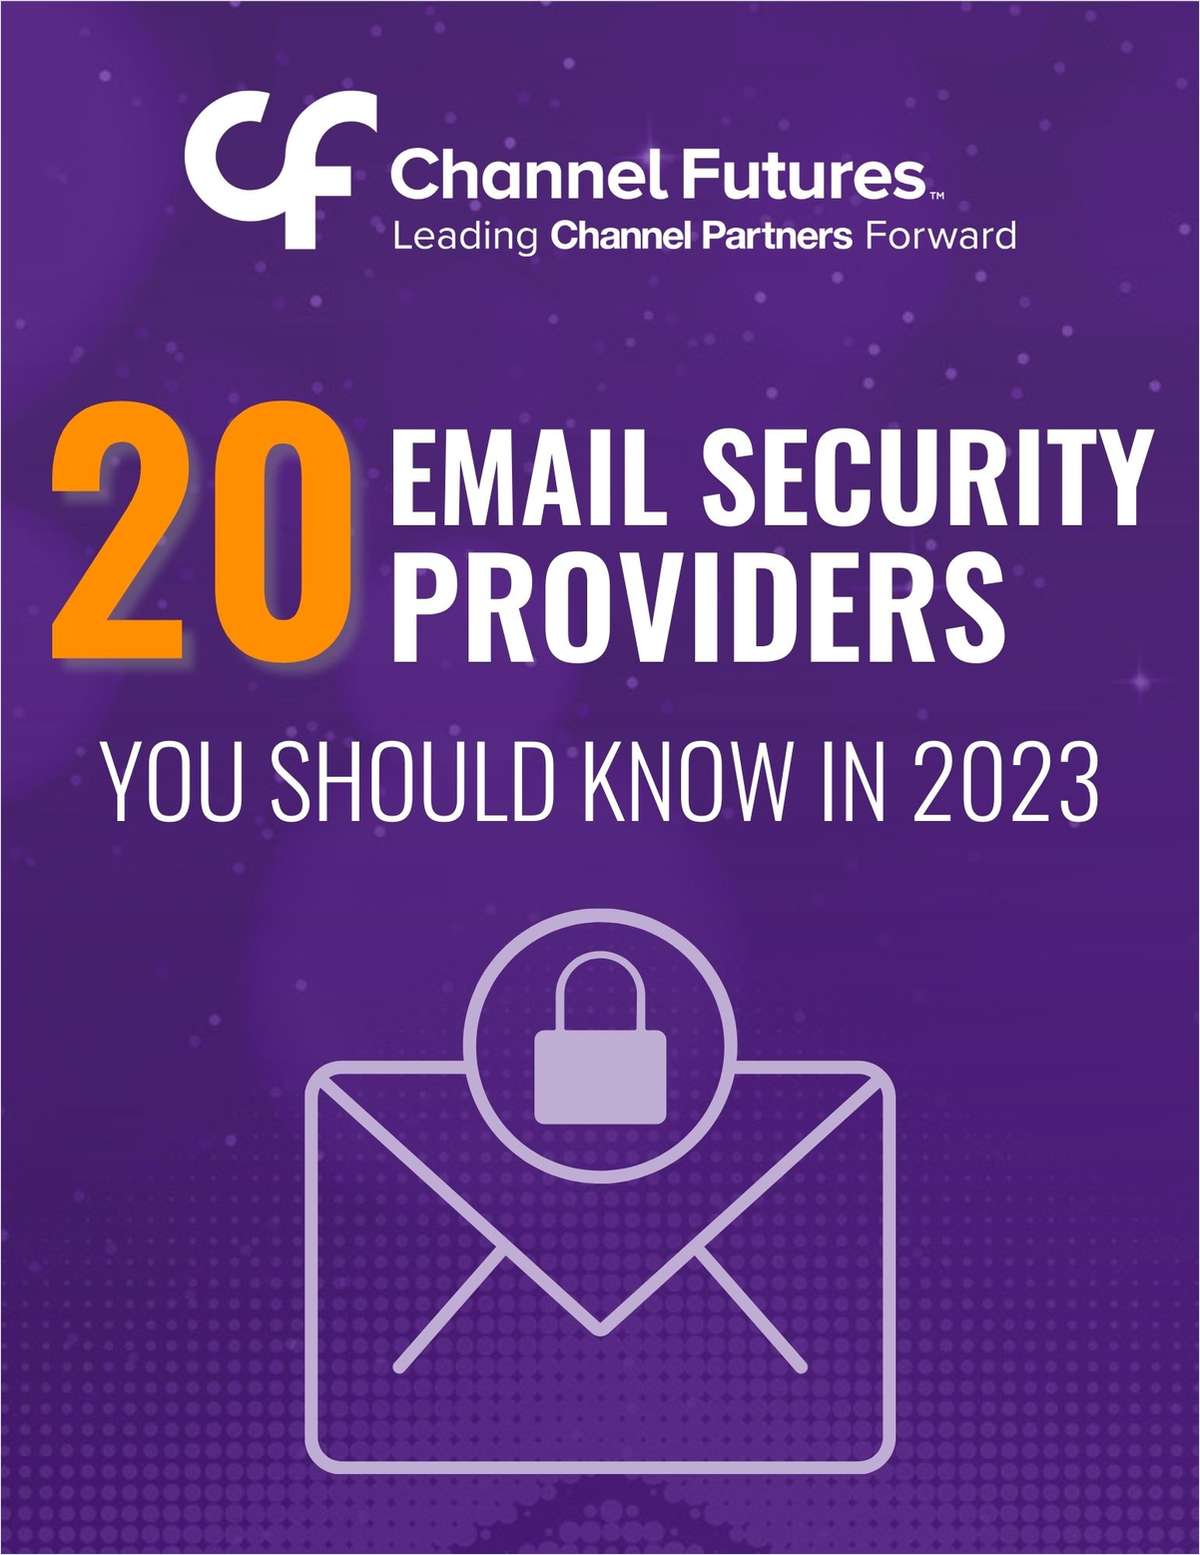 20 Email Security Providers You Should Know in 2023